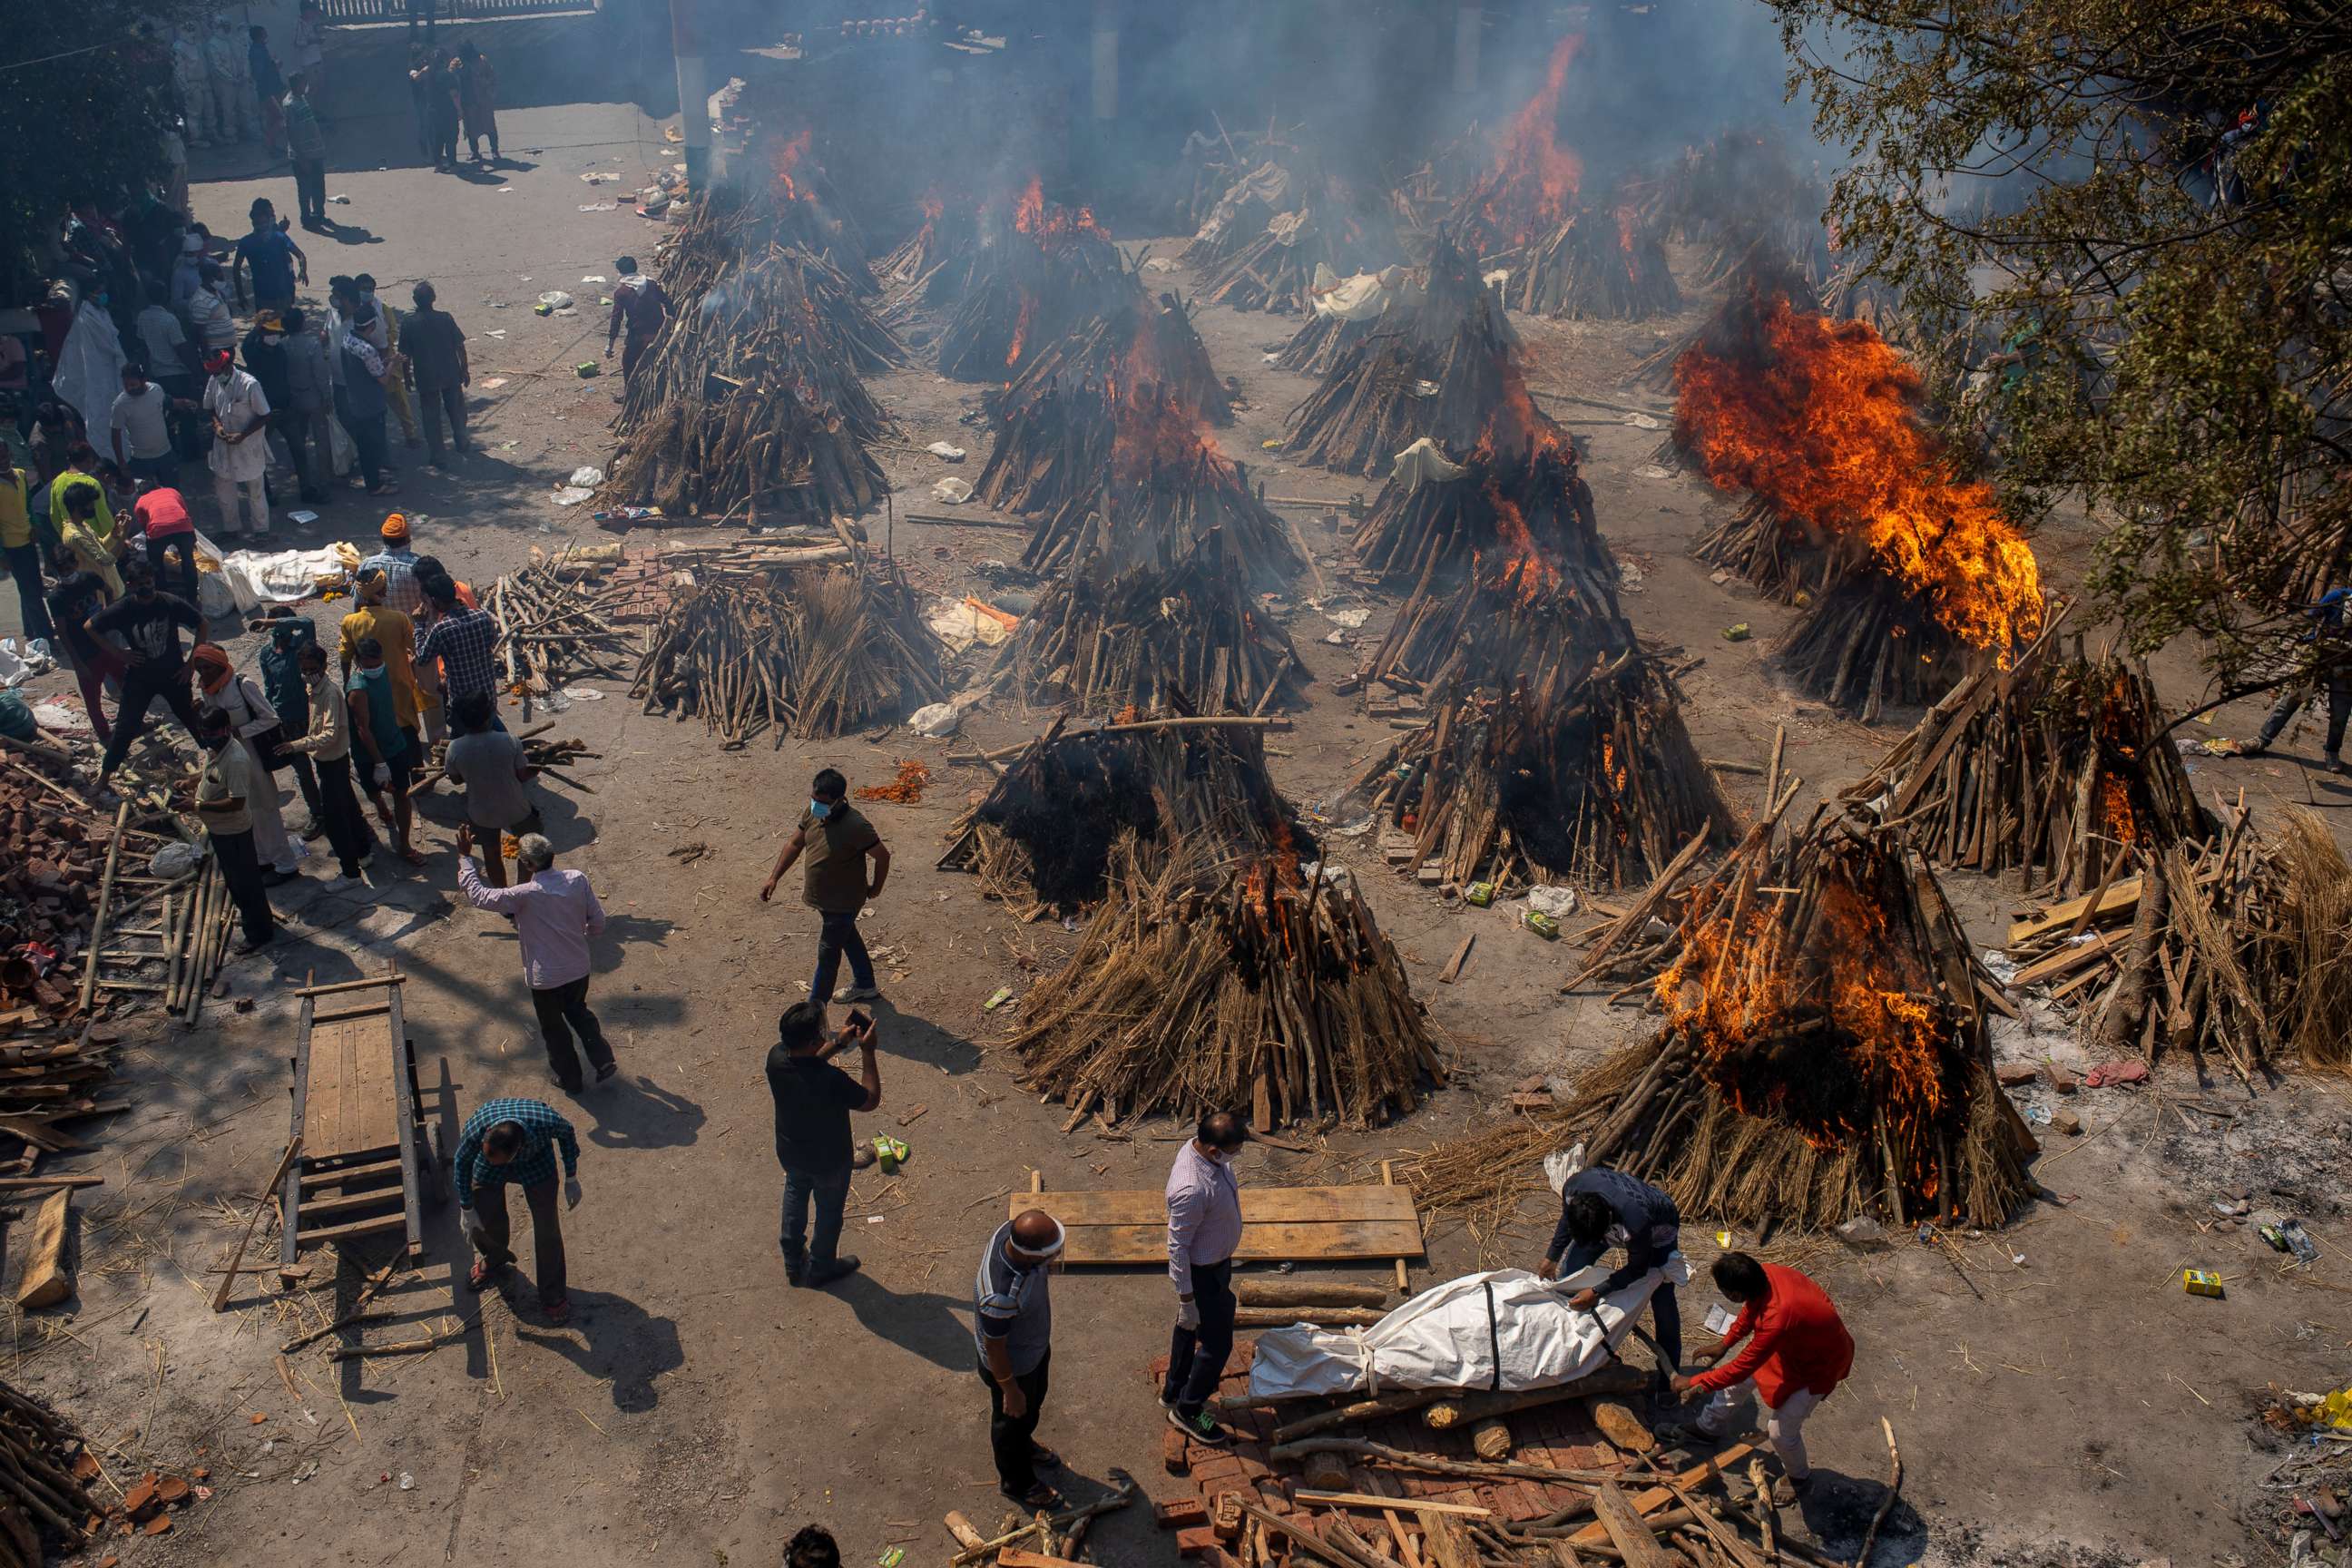 PHOTO: Multiple funeral pyres of victims of COVID-19 burn at a ground that has been converted into a crematorium for mass cremation in New Delhi, India, April 24, 2021.